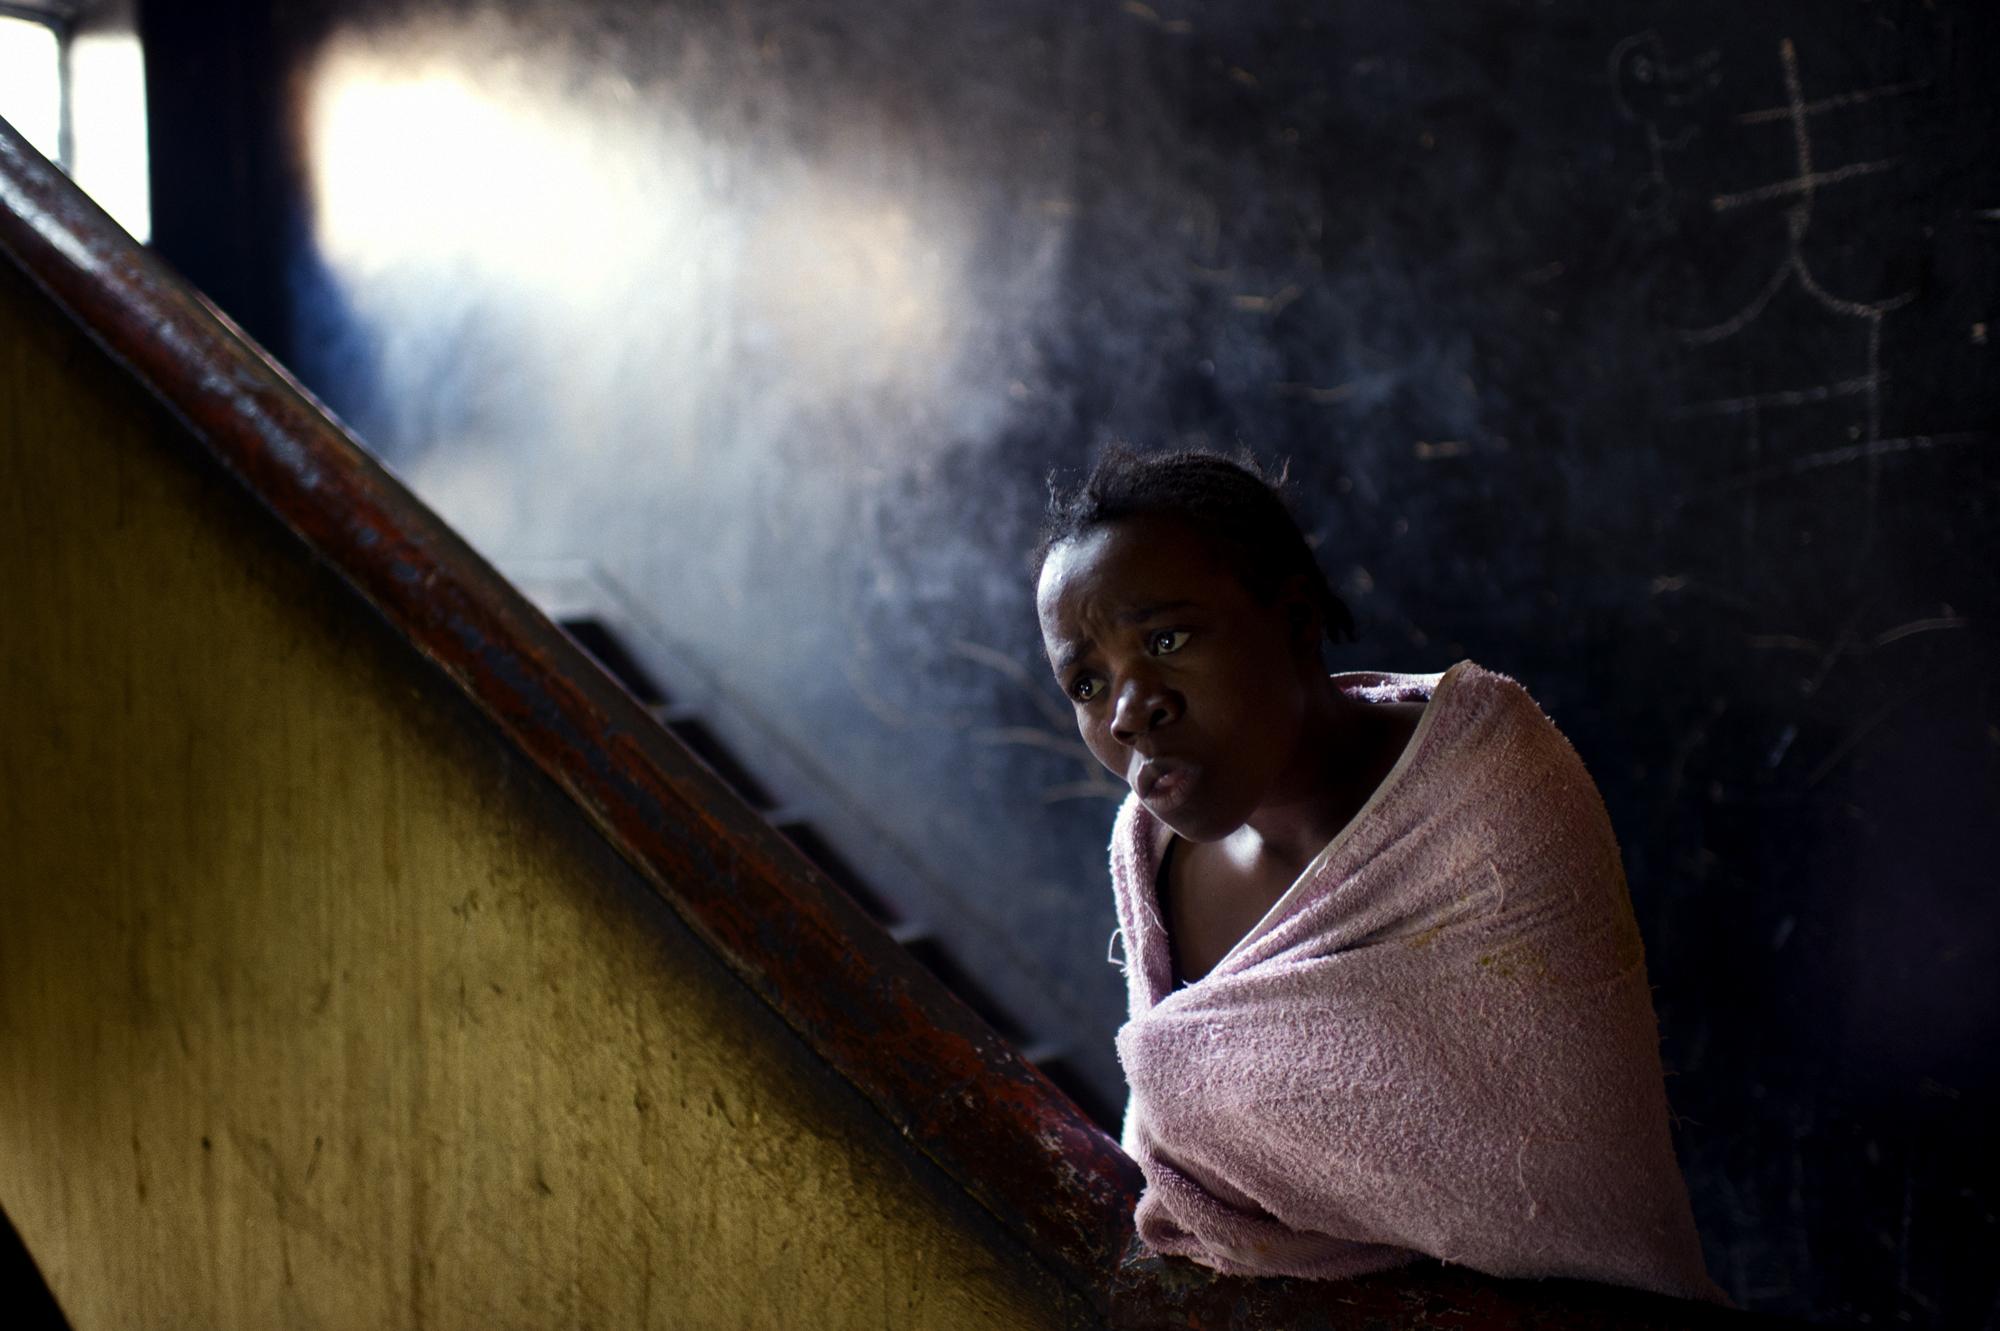 Into the shadows - Johannesburg, South Africa. June 2011. A Zimbabwean...